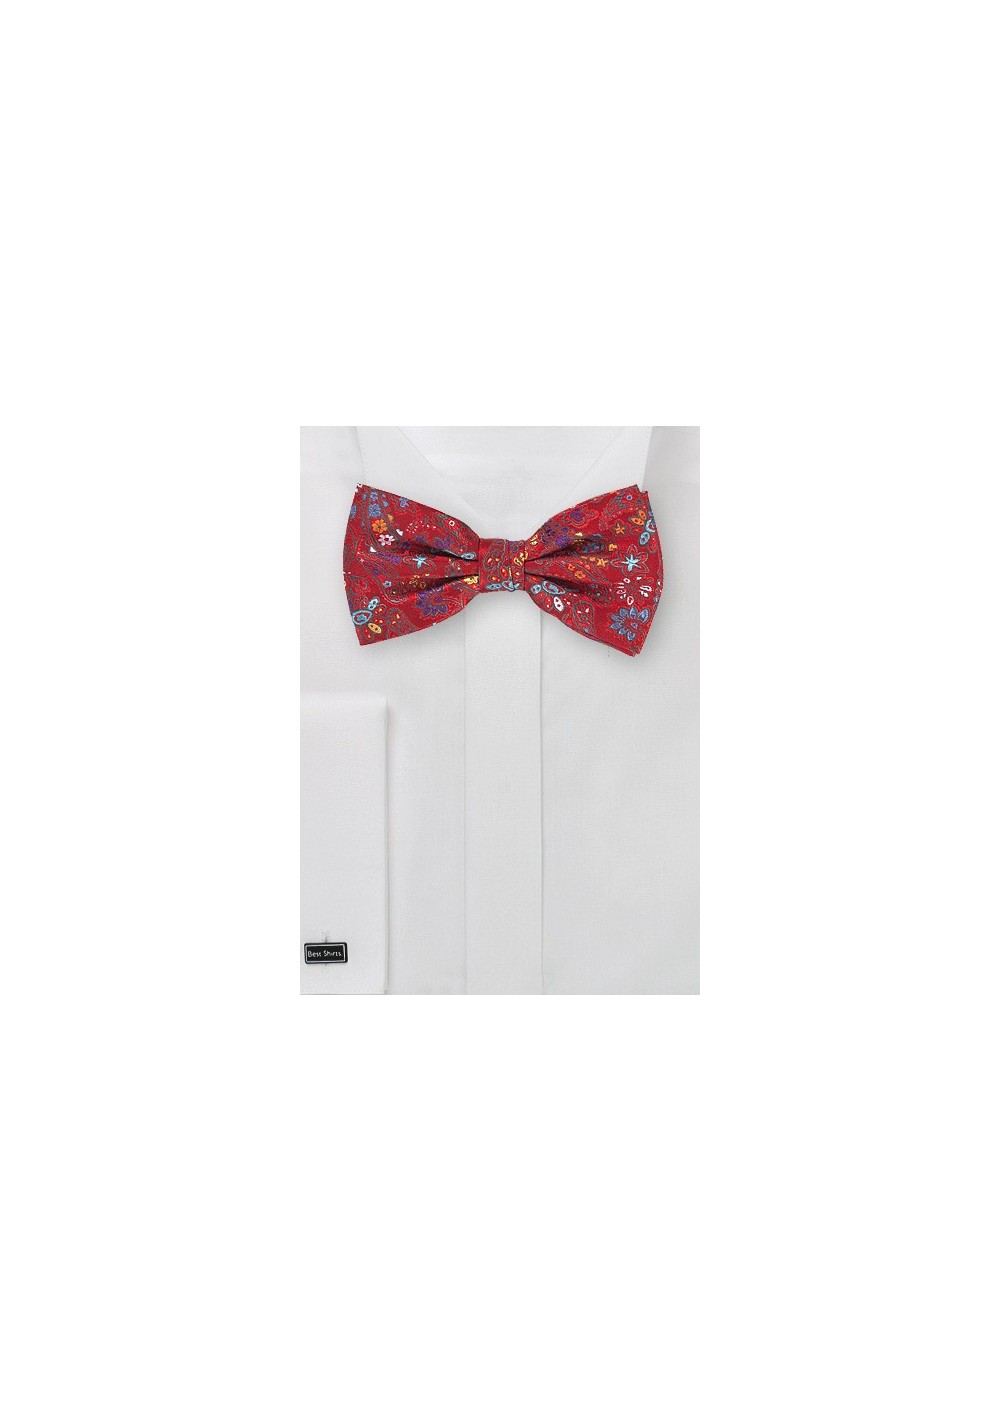 Pre-Tied Flower and Paisley Bow Tie in Red